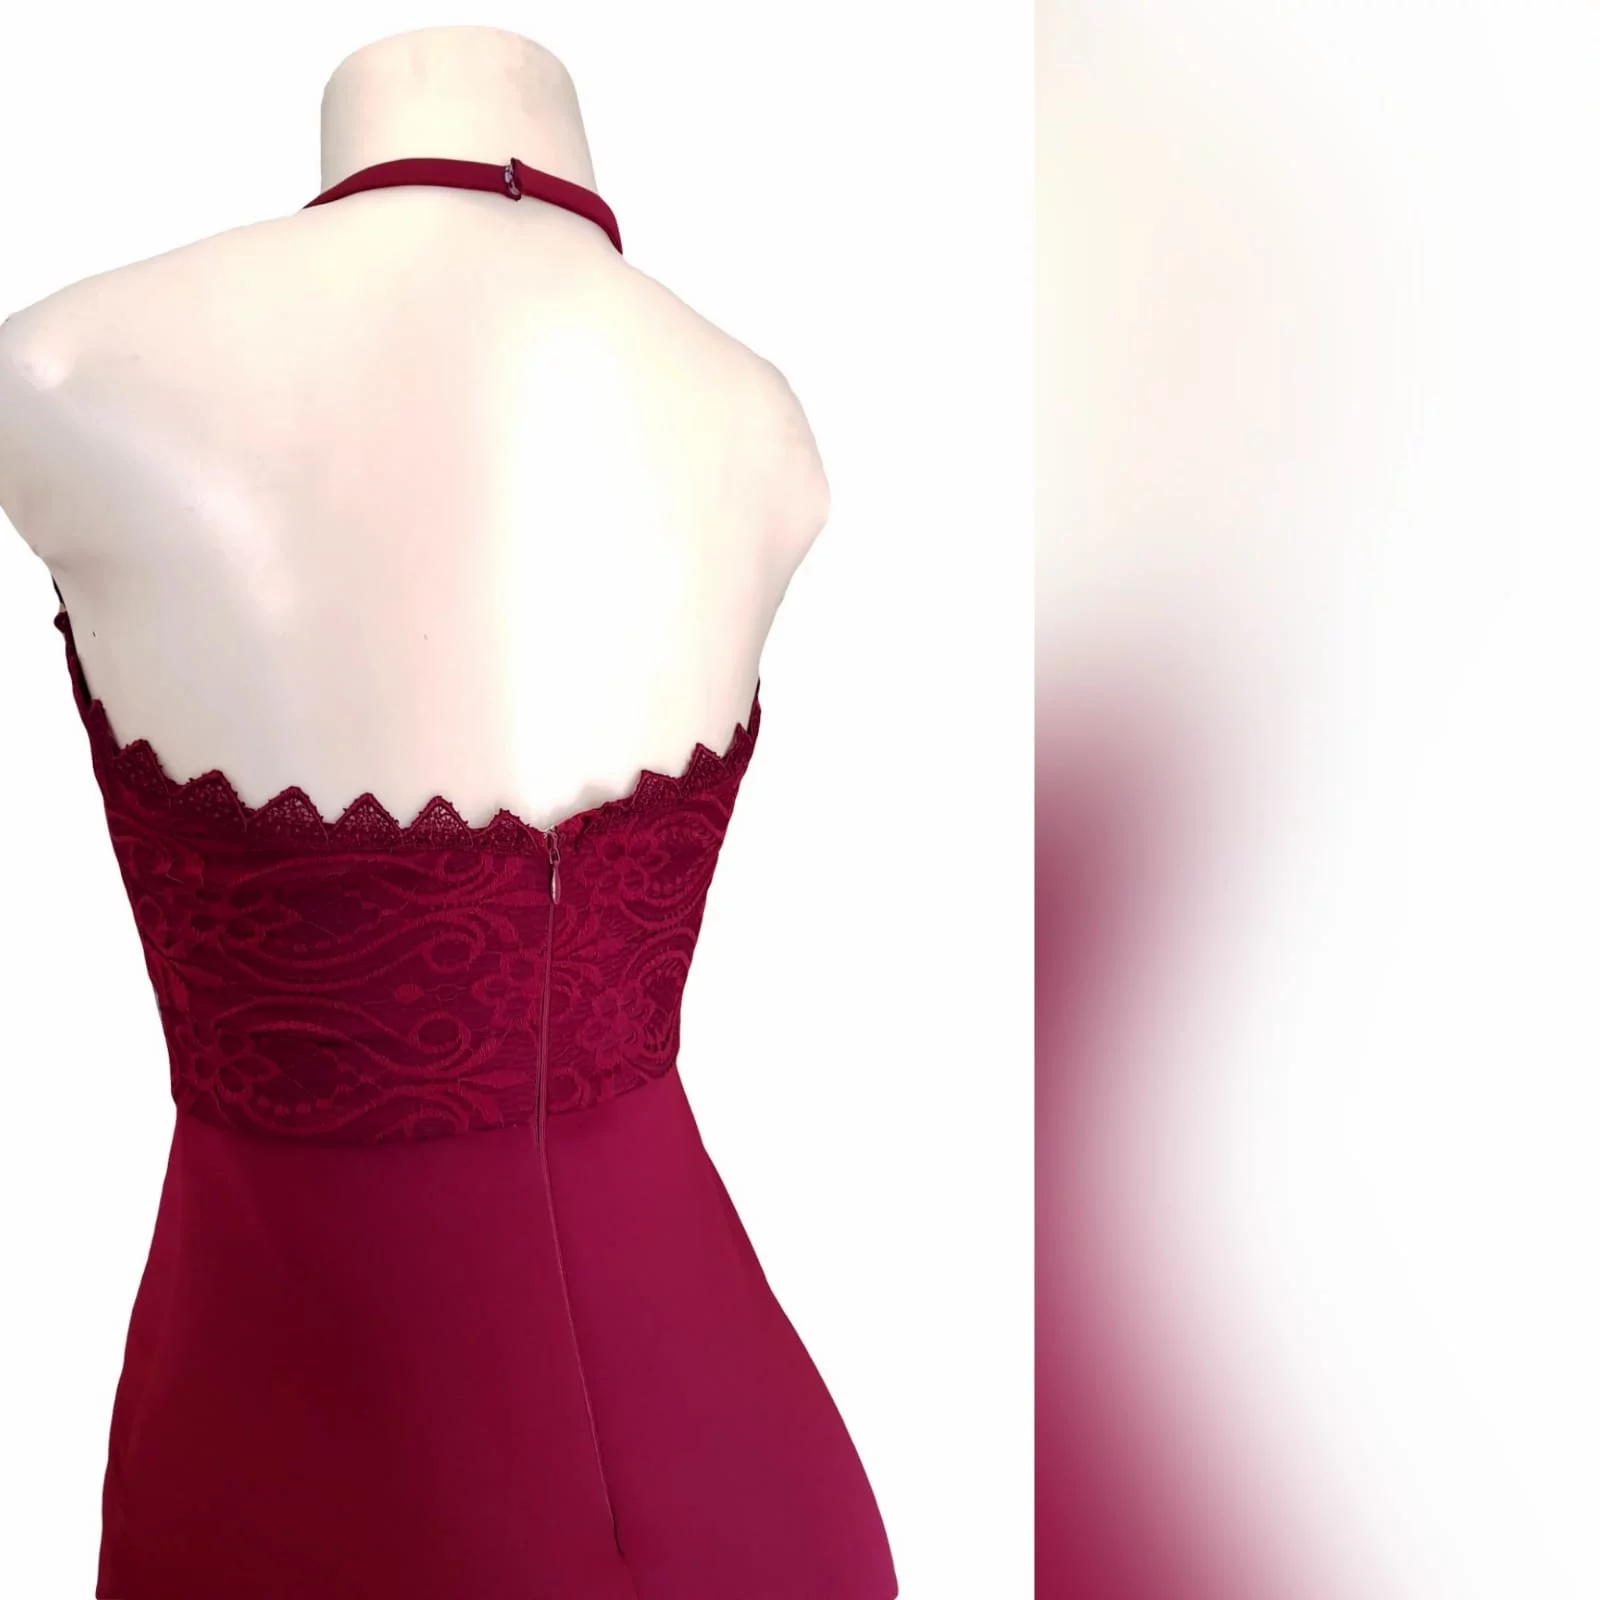 Burgundy soft mermaid gorgeous evening dress 12 this gorgeous evening dress was created for my client in south africa to celebrate her special occasion. A burgundy soft mermaid prom dress with a lace bodice, a sheer lace neckline and dramatic train.